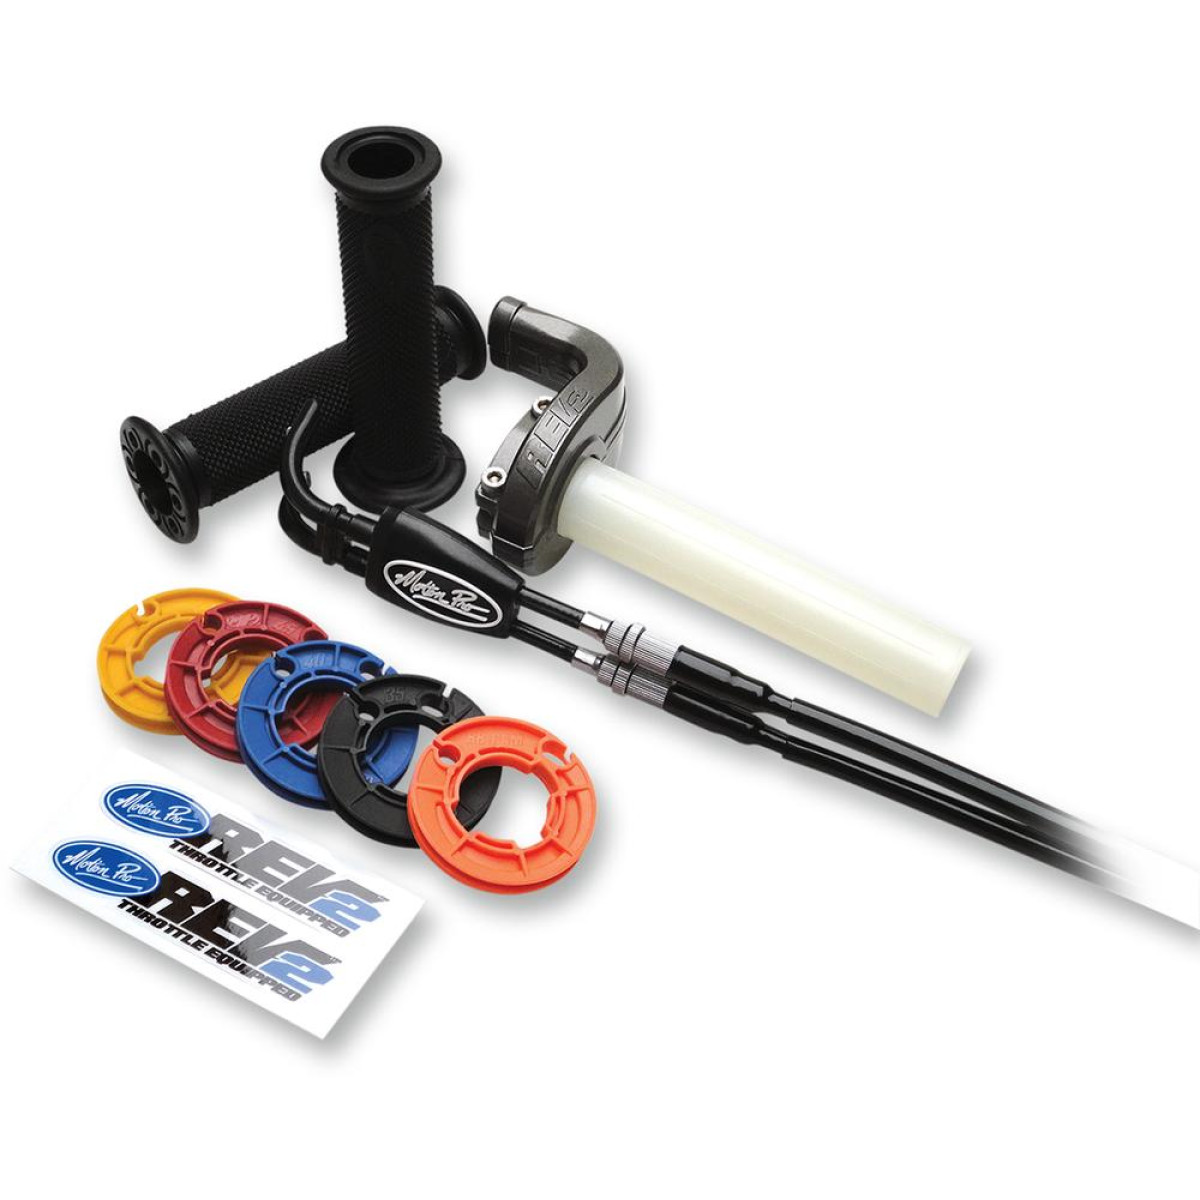 Motion Pro Throttle kit Rev2 with 76 mm extra cable length, Husaberg FE 250/350/501/550 '13, KTM SX-F 250, EXC-F/SX-F 350/450